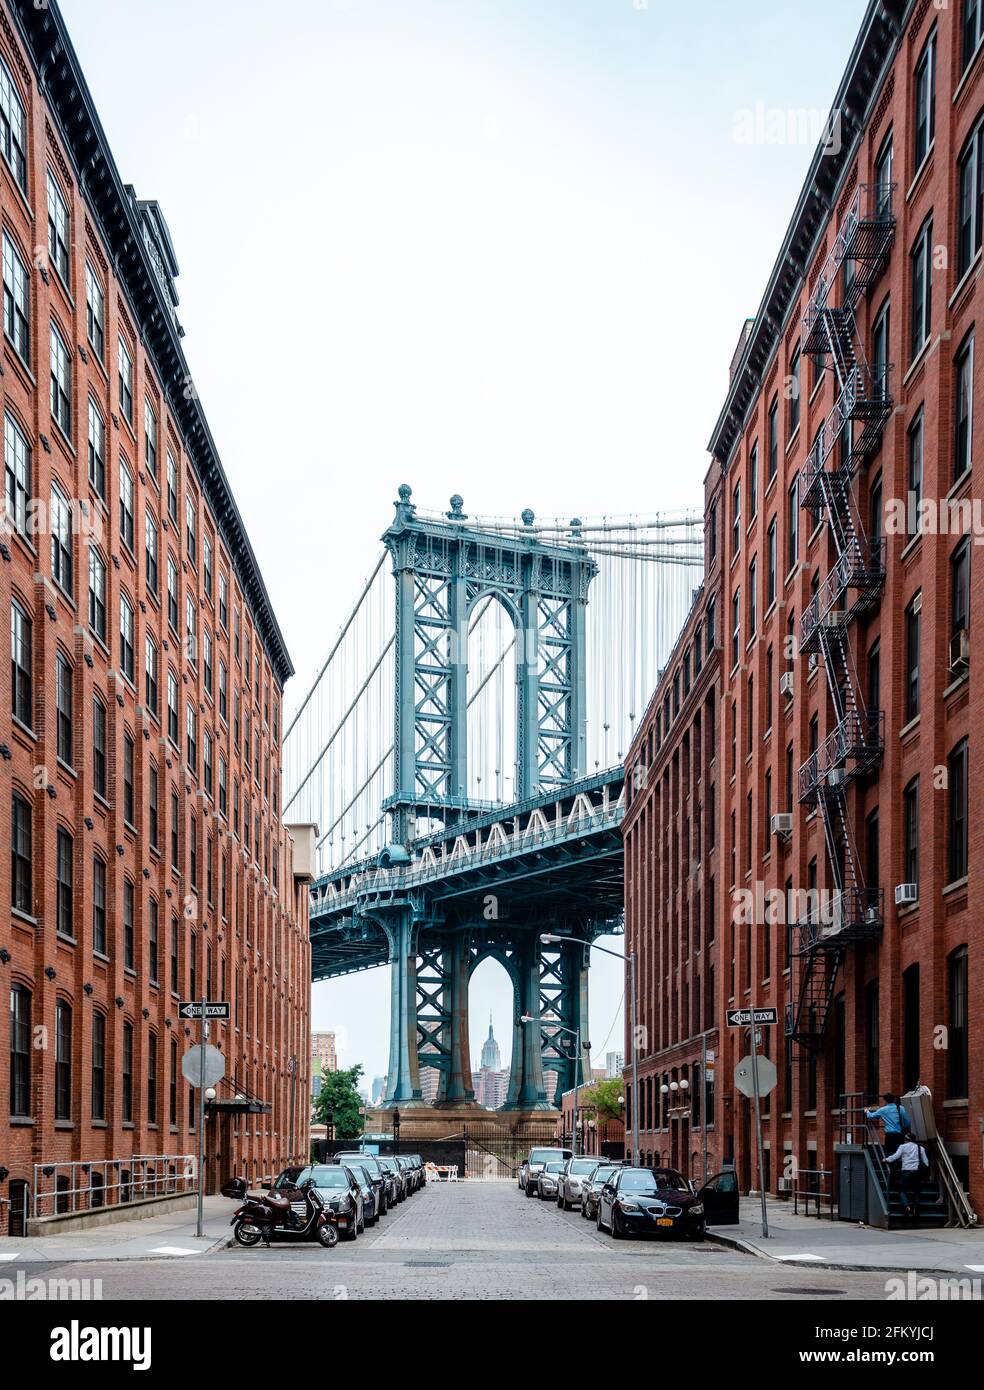 New York City, NY, USA - July 16 2014: The Manhattan bridge from Brooklyn Heights (Washington St and Water St), with the Empire State Building in the Stock Photo